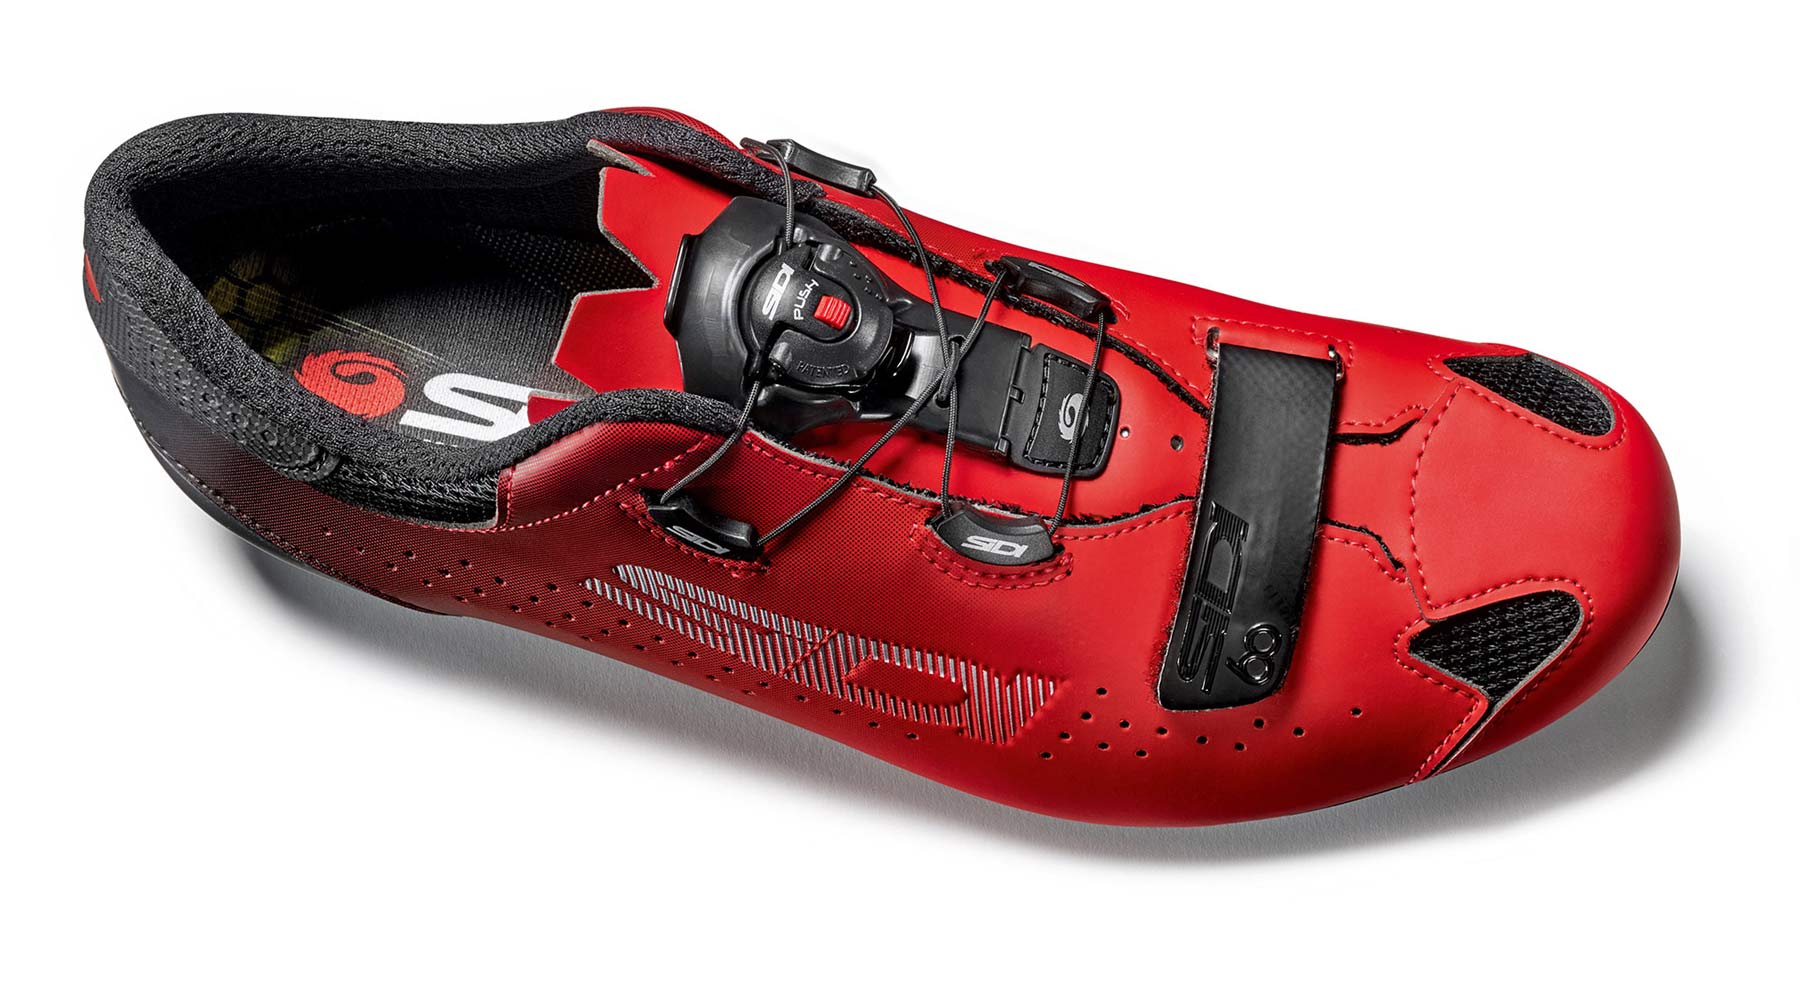 2020 Sidi Sixty carbon road shoes, lightweight high-performance carbon sole road bike shoes Sidi 60th anniversary edition